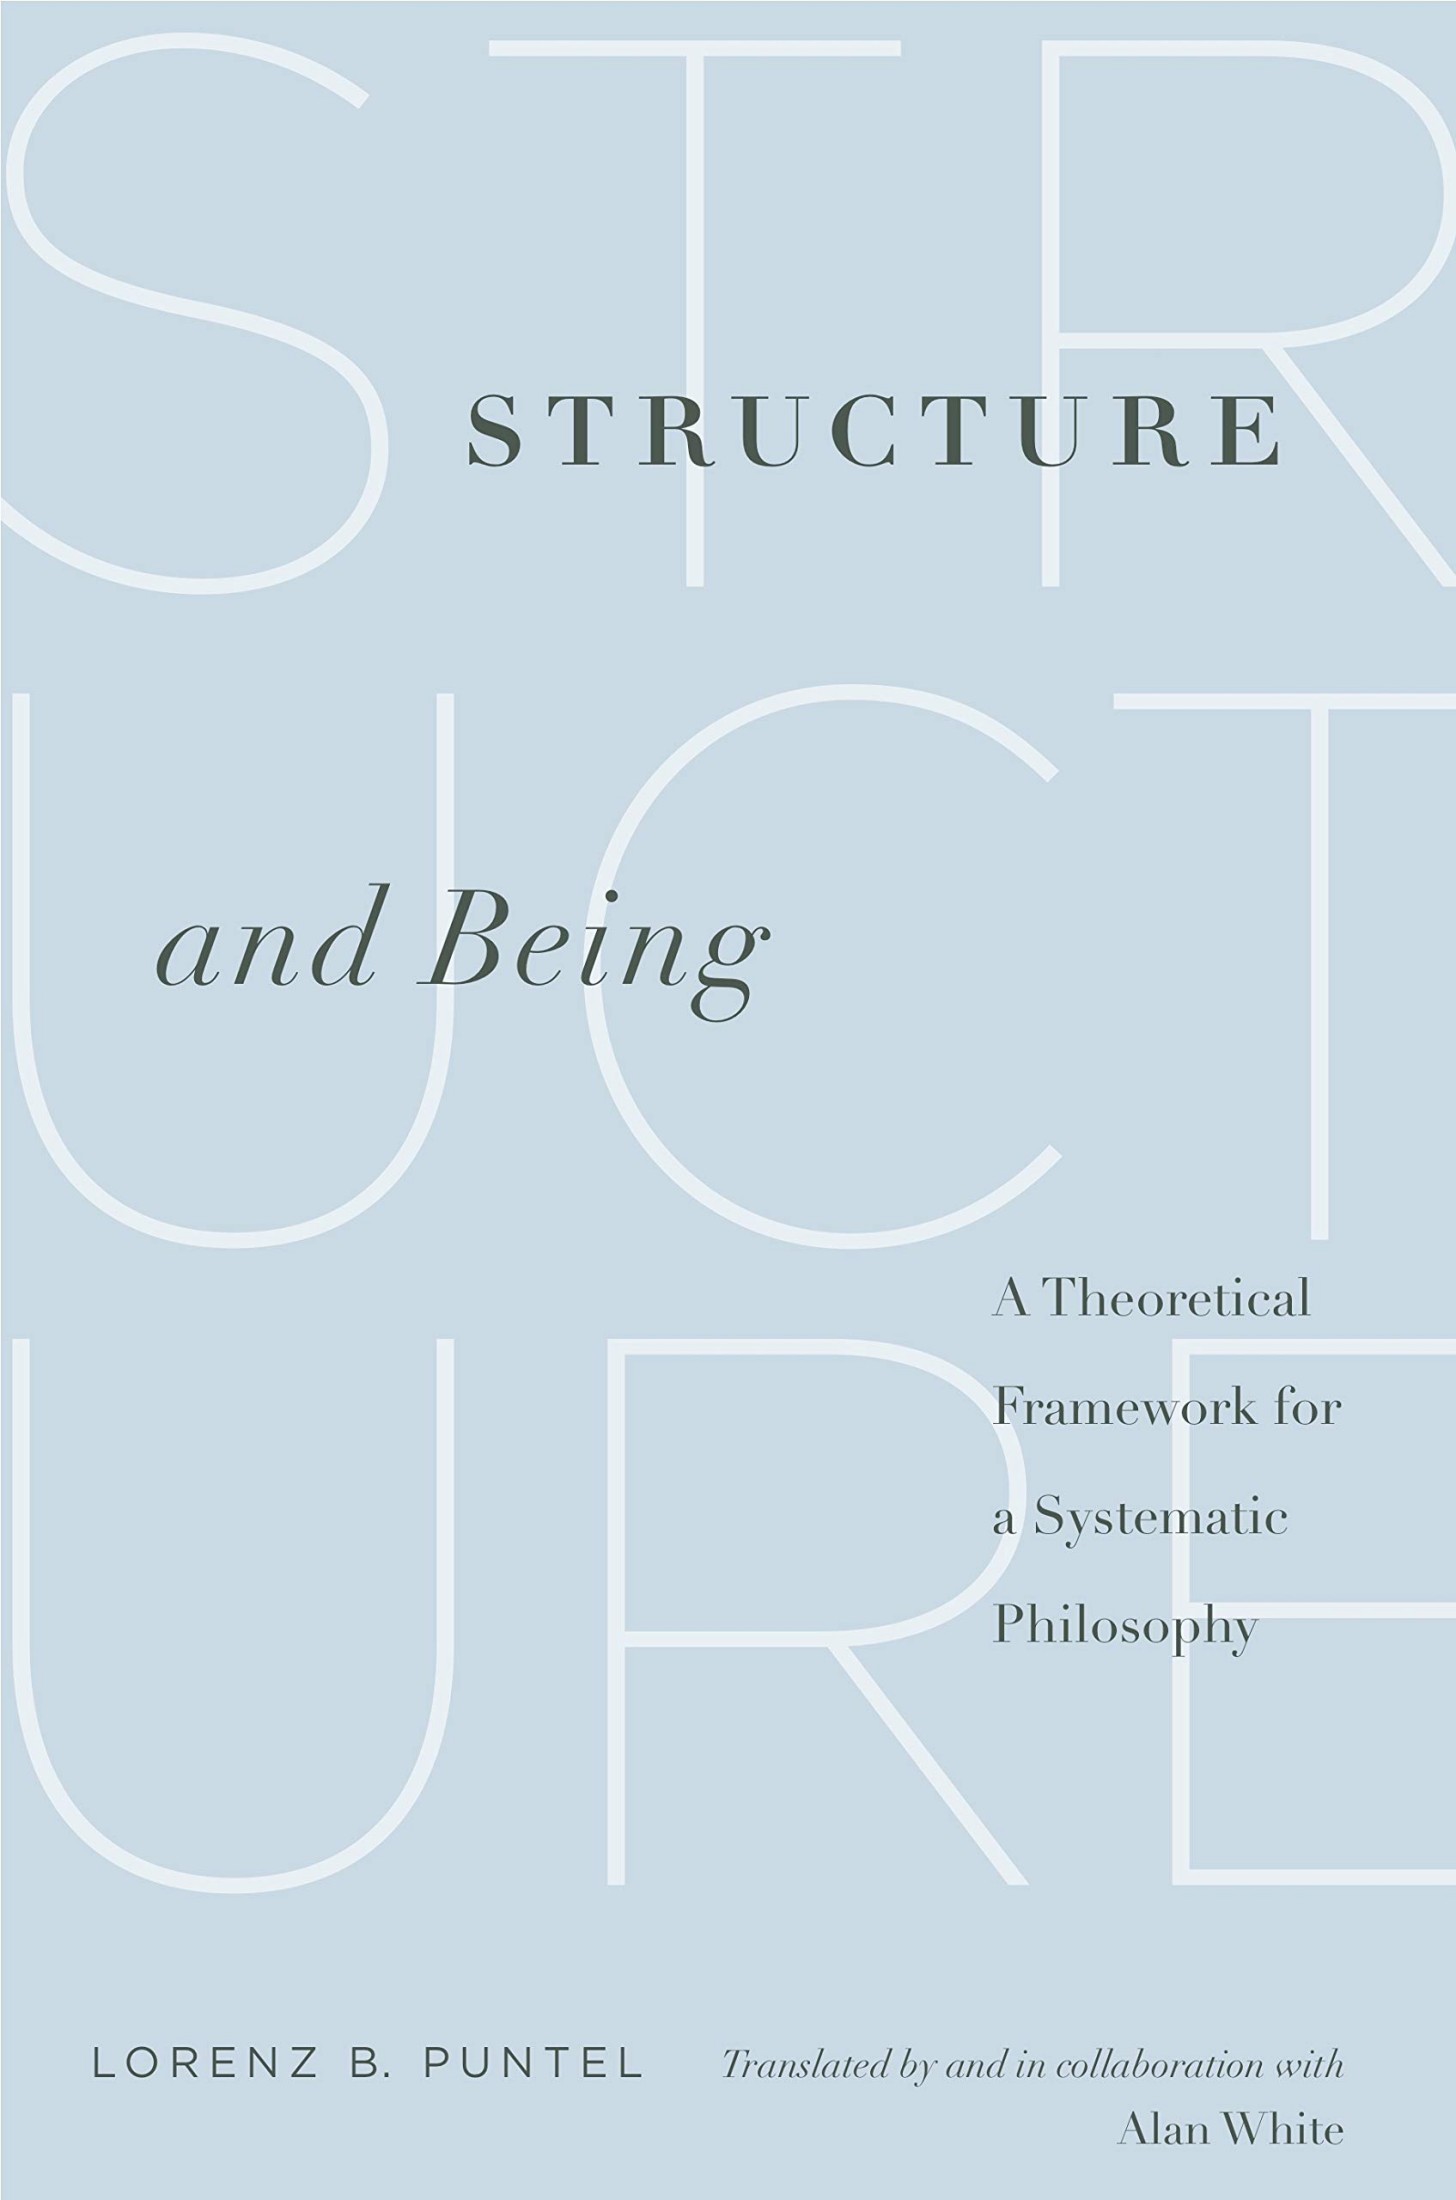 Structure and Being: A Theoretical Framework for a Systematic Philosophy